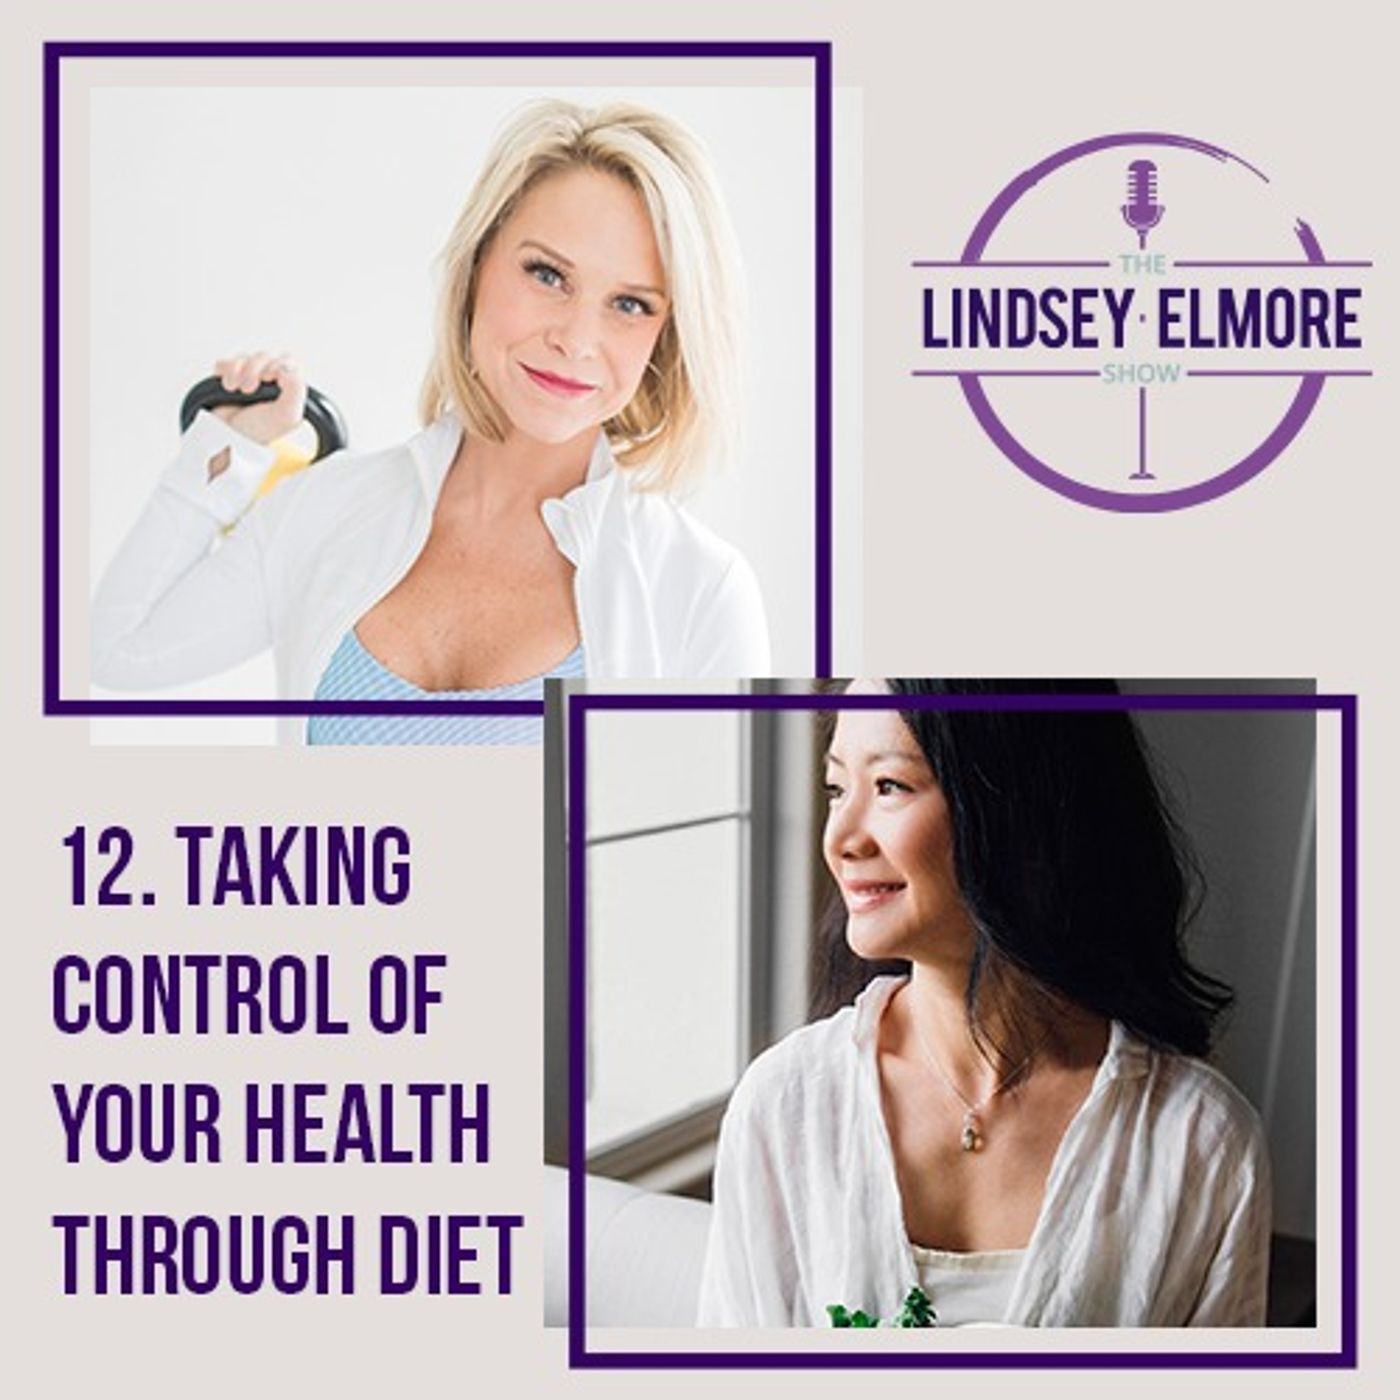 Taking control of your health through diet. Interviews with Amanda Nighbert and Dr. Vivian Chen.